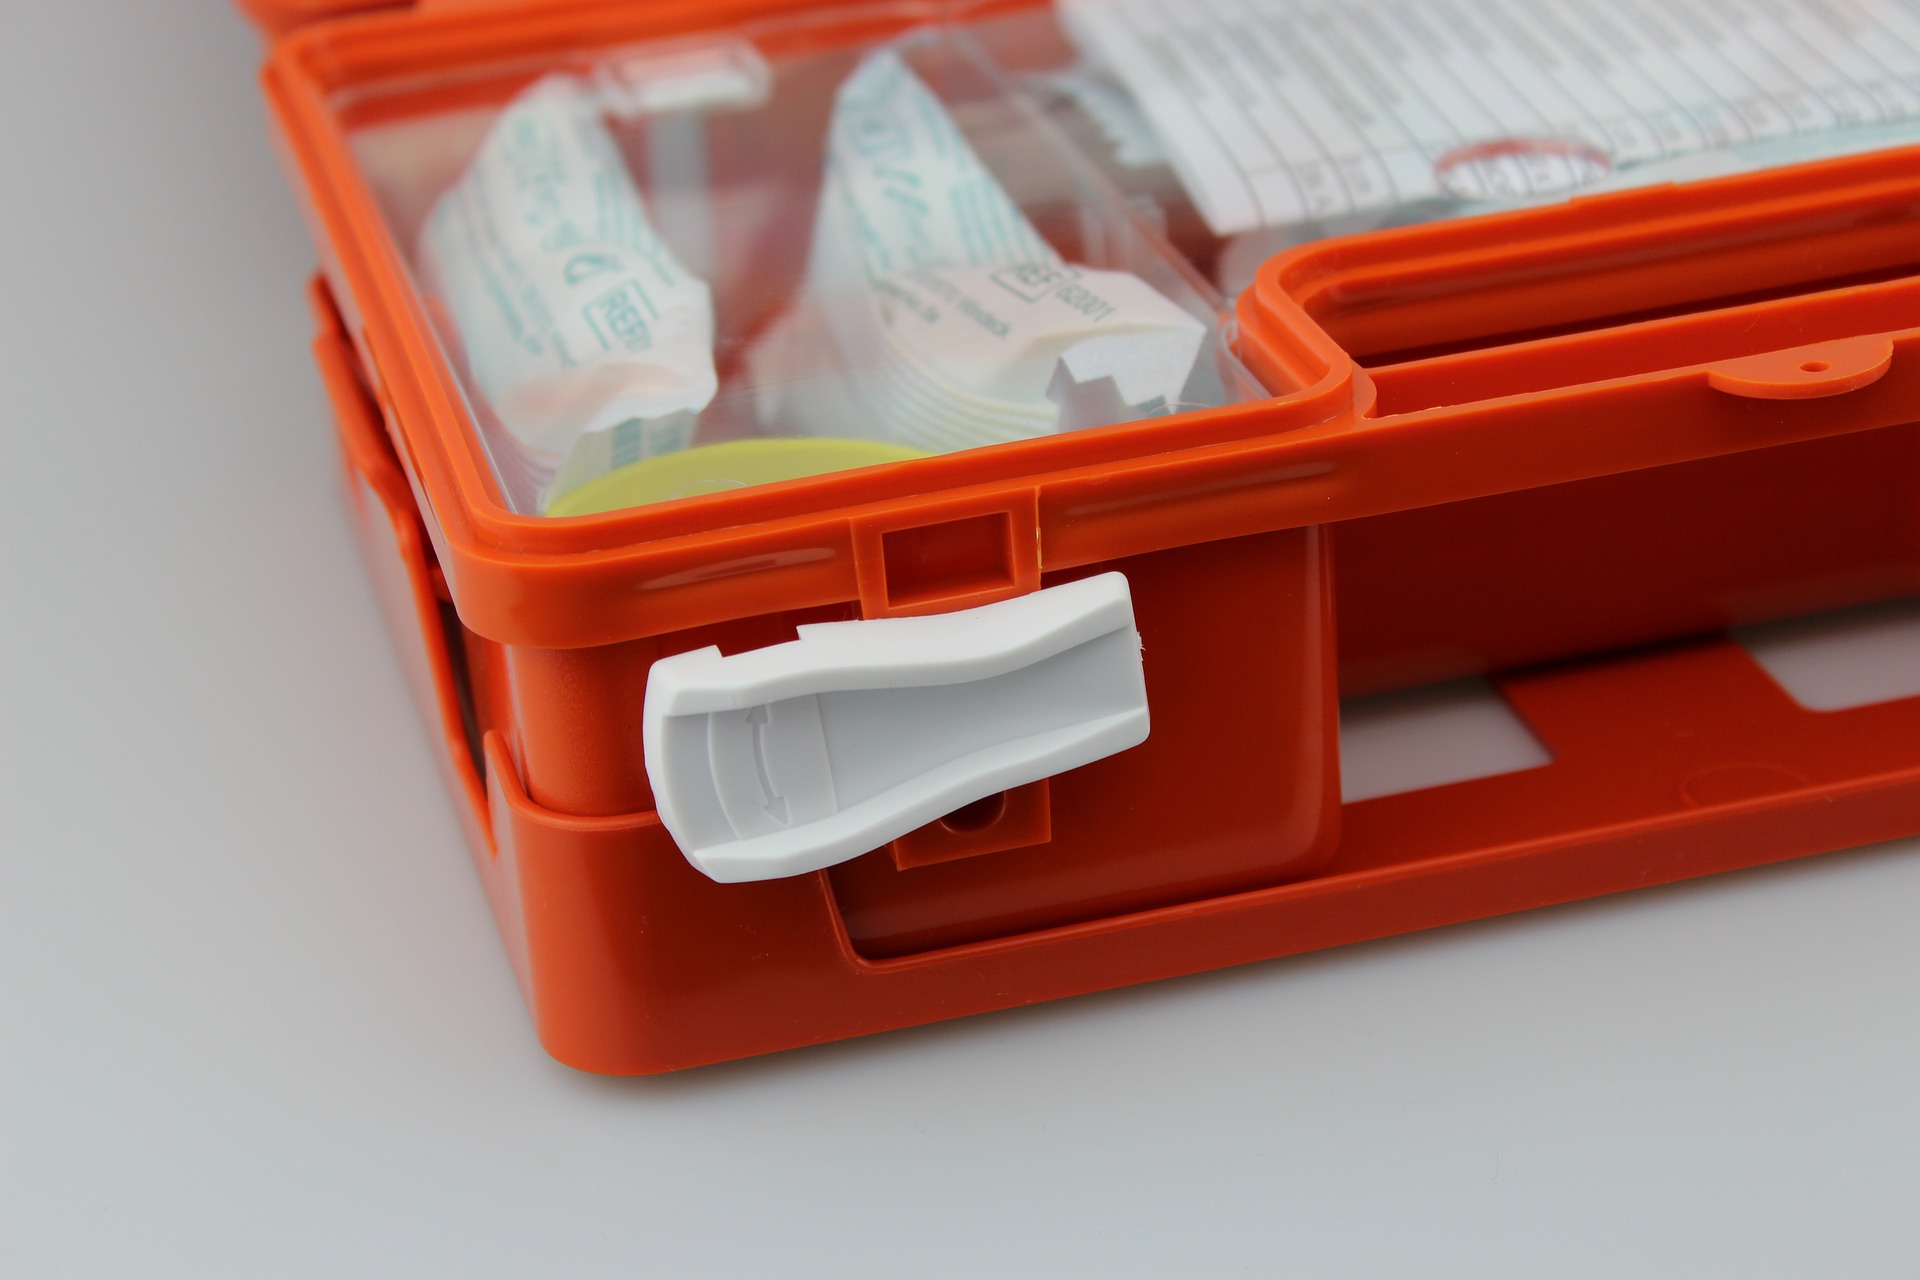 5 Items Every Driver Should Always Include in a Car First Aid Kit